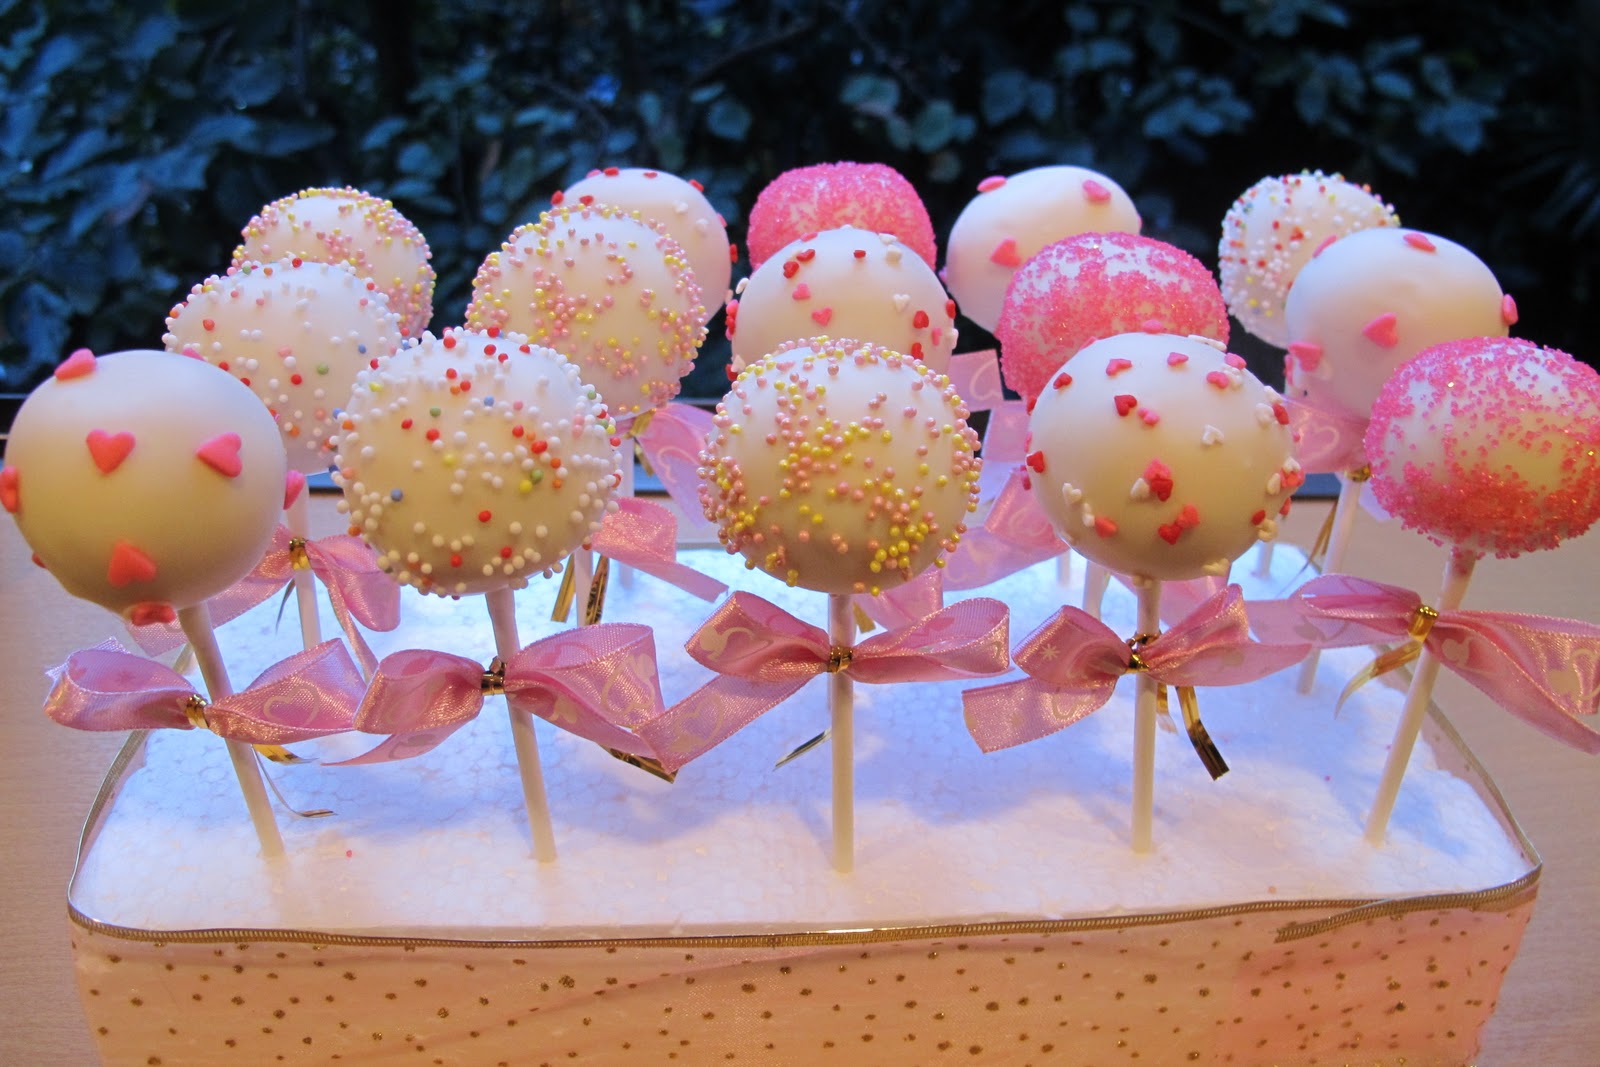 Another Picture of wedding cake pops.